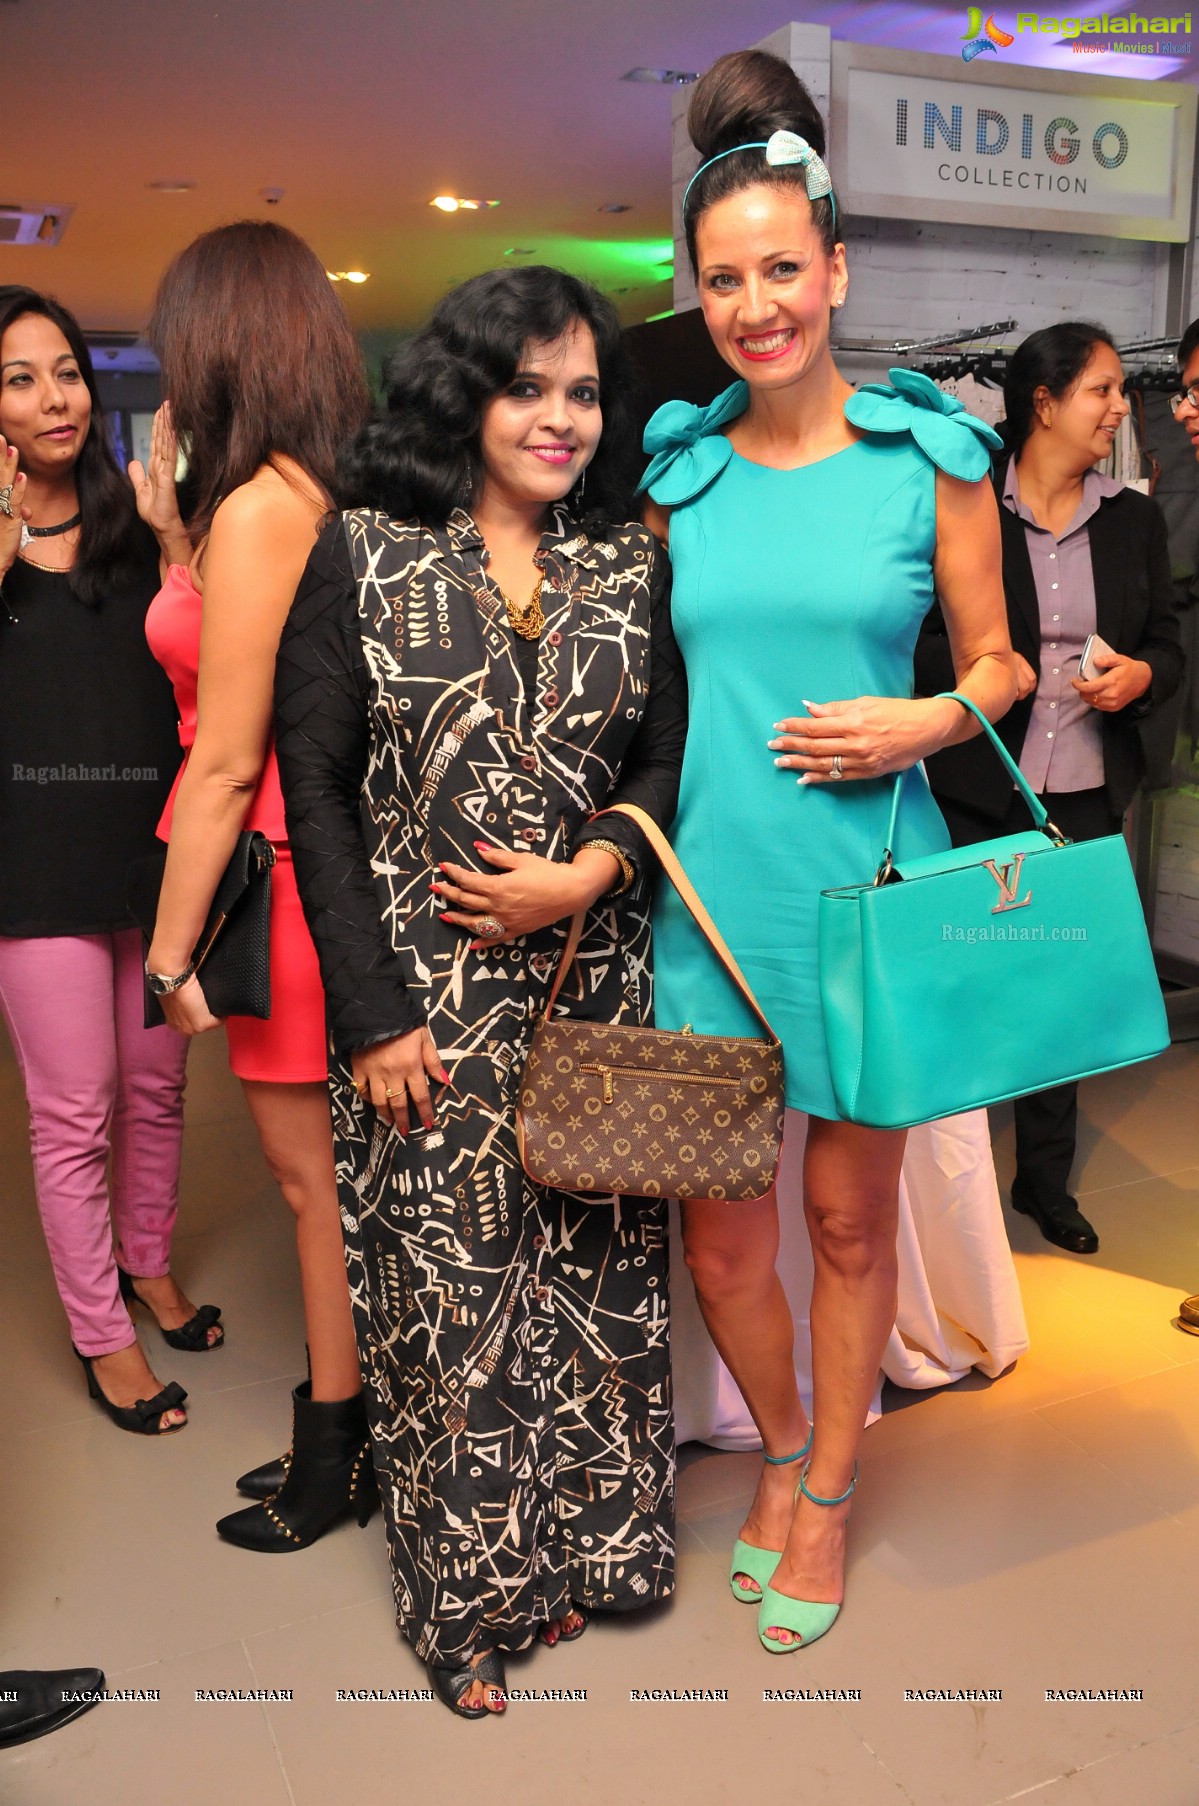 Marks & Spencer Launch in Hyderabad